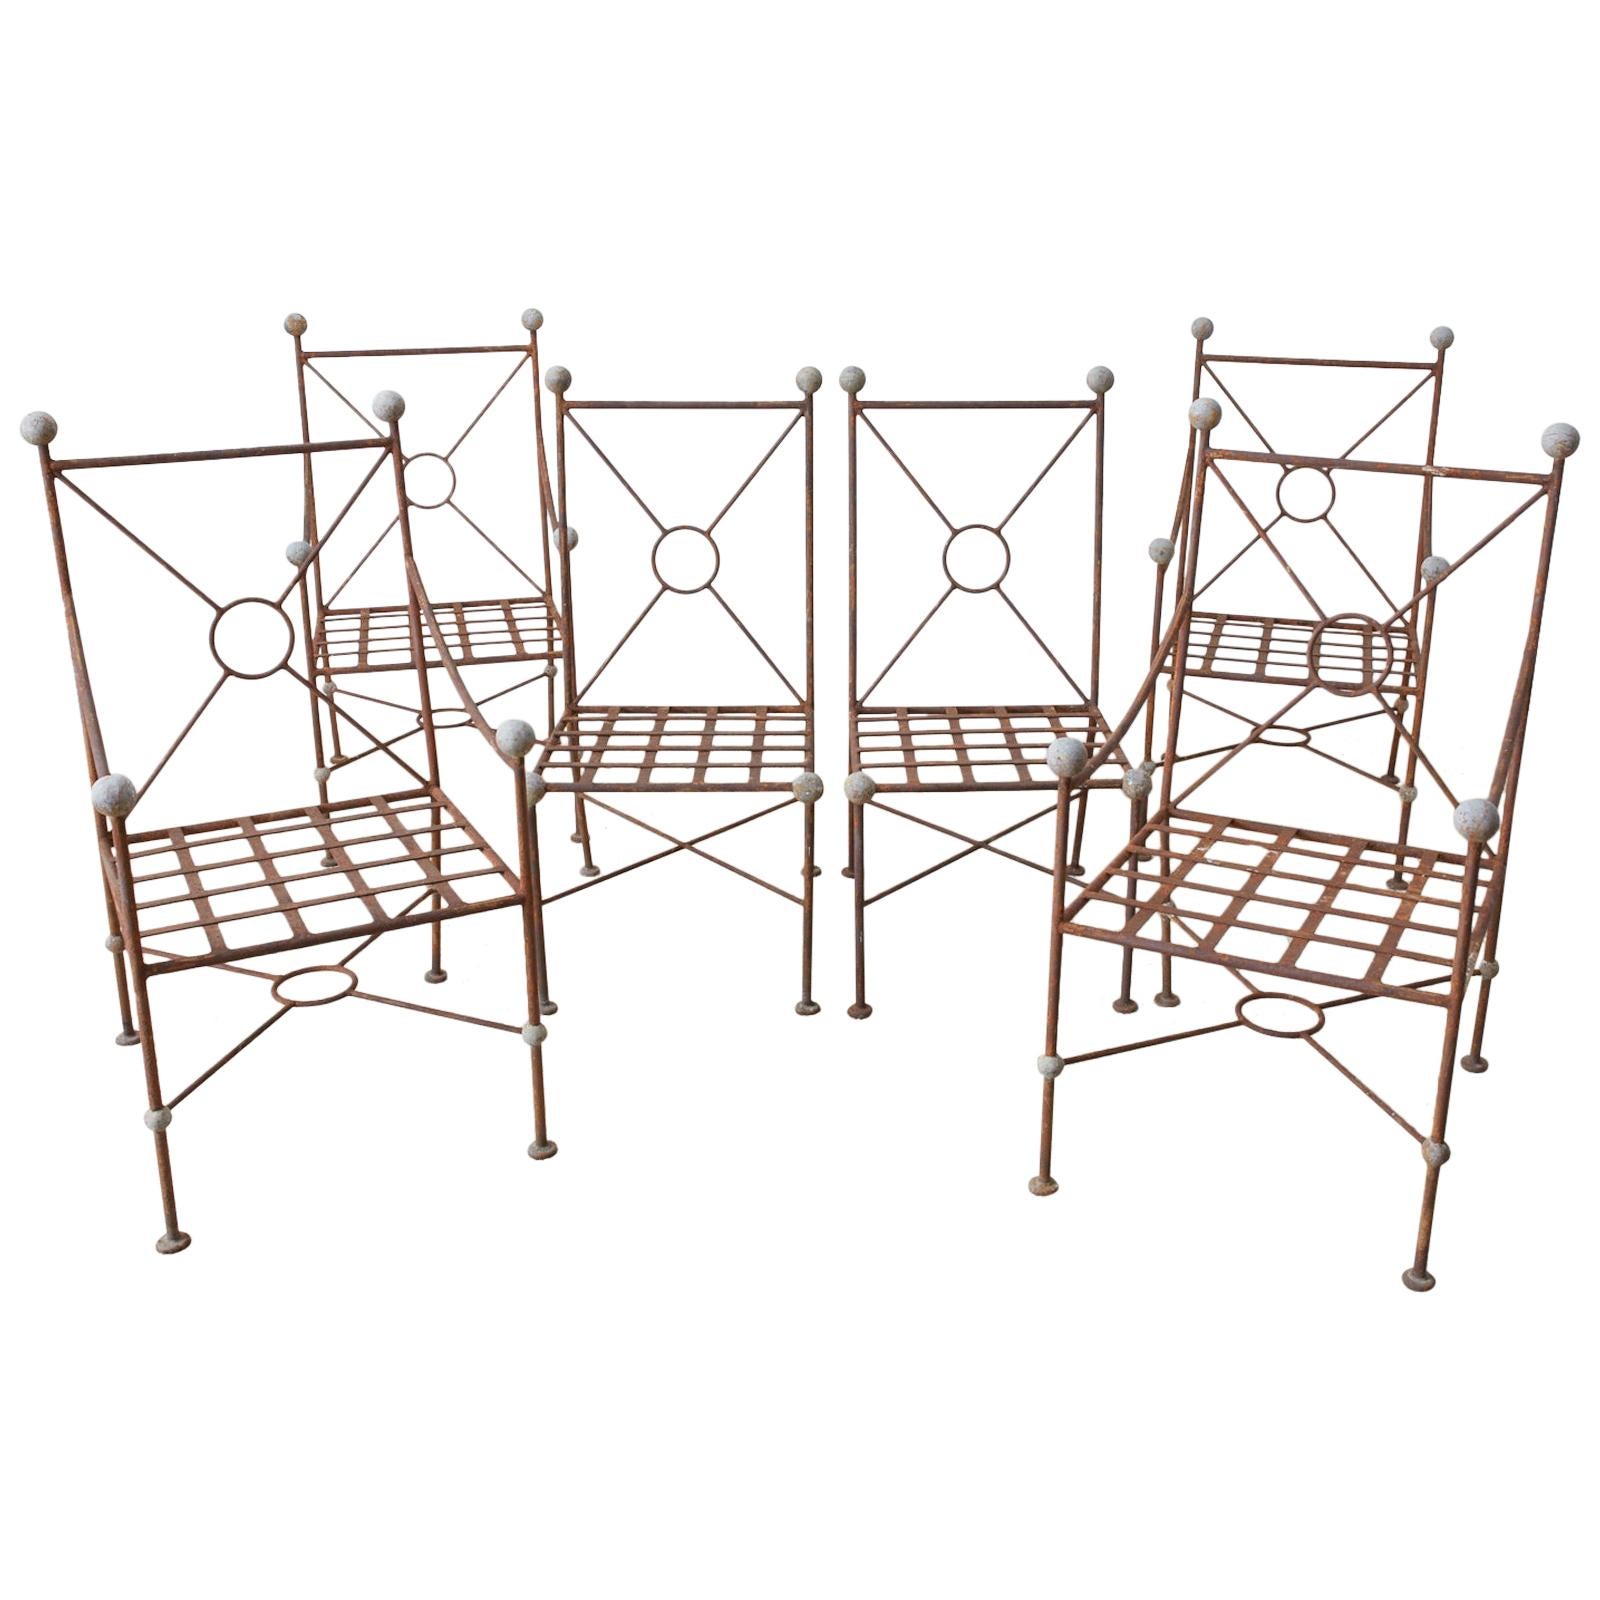 Set of Six Mario Papperzini for Salterini Style Garden Chairs